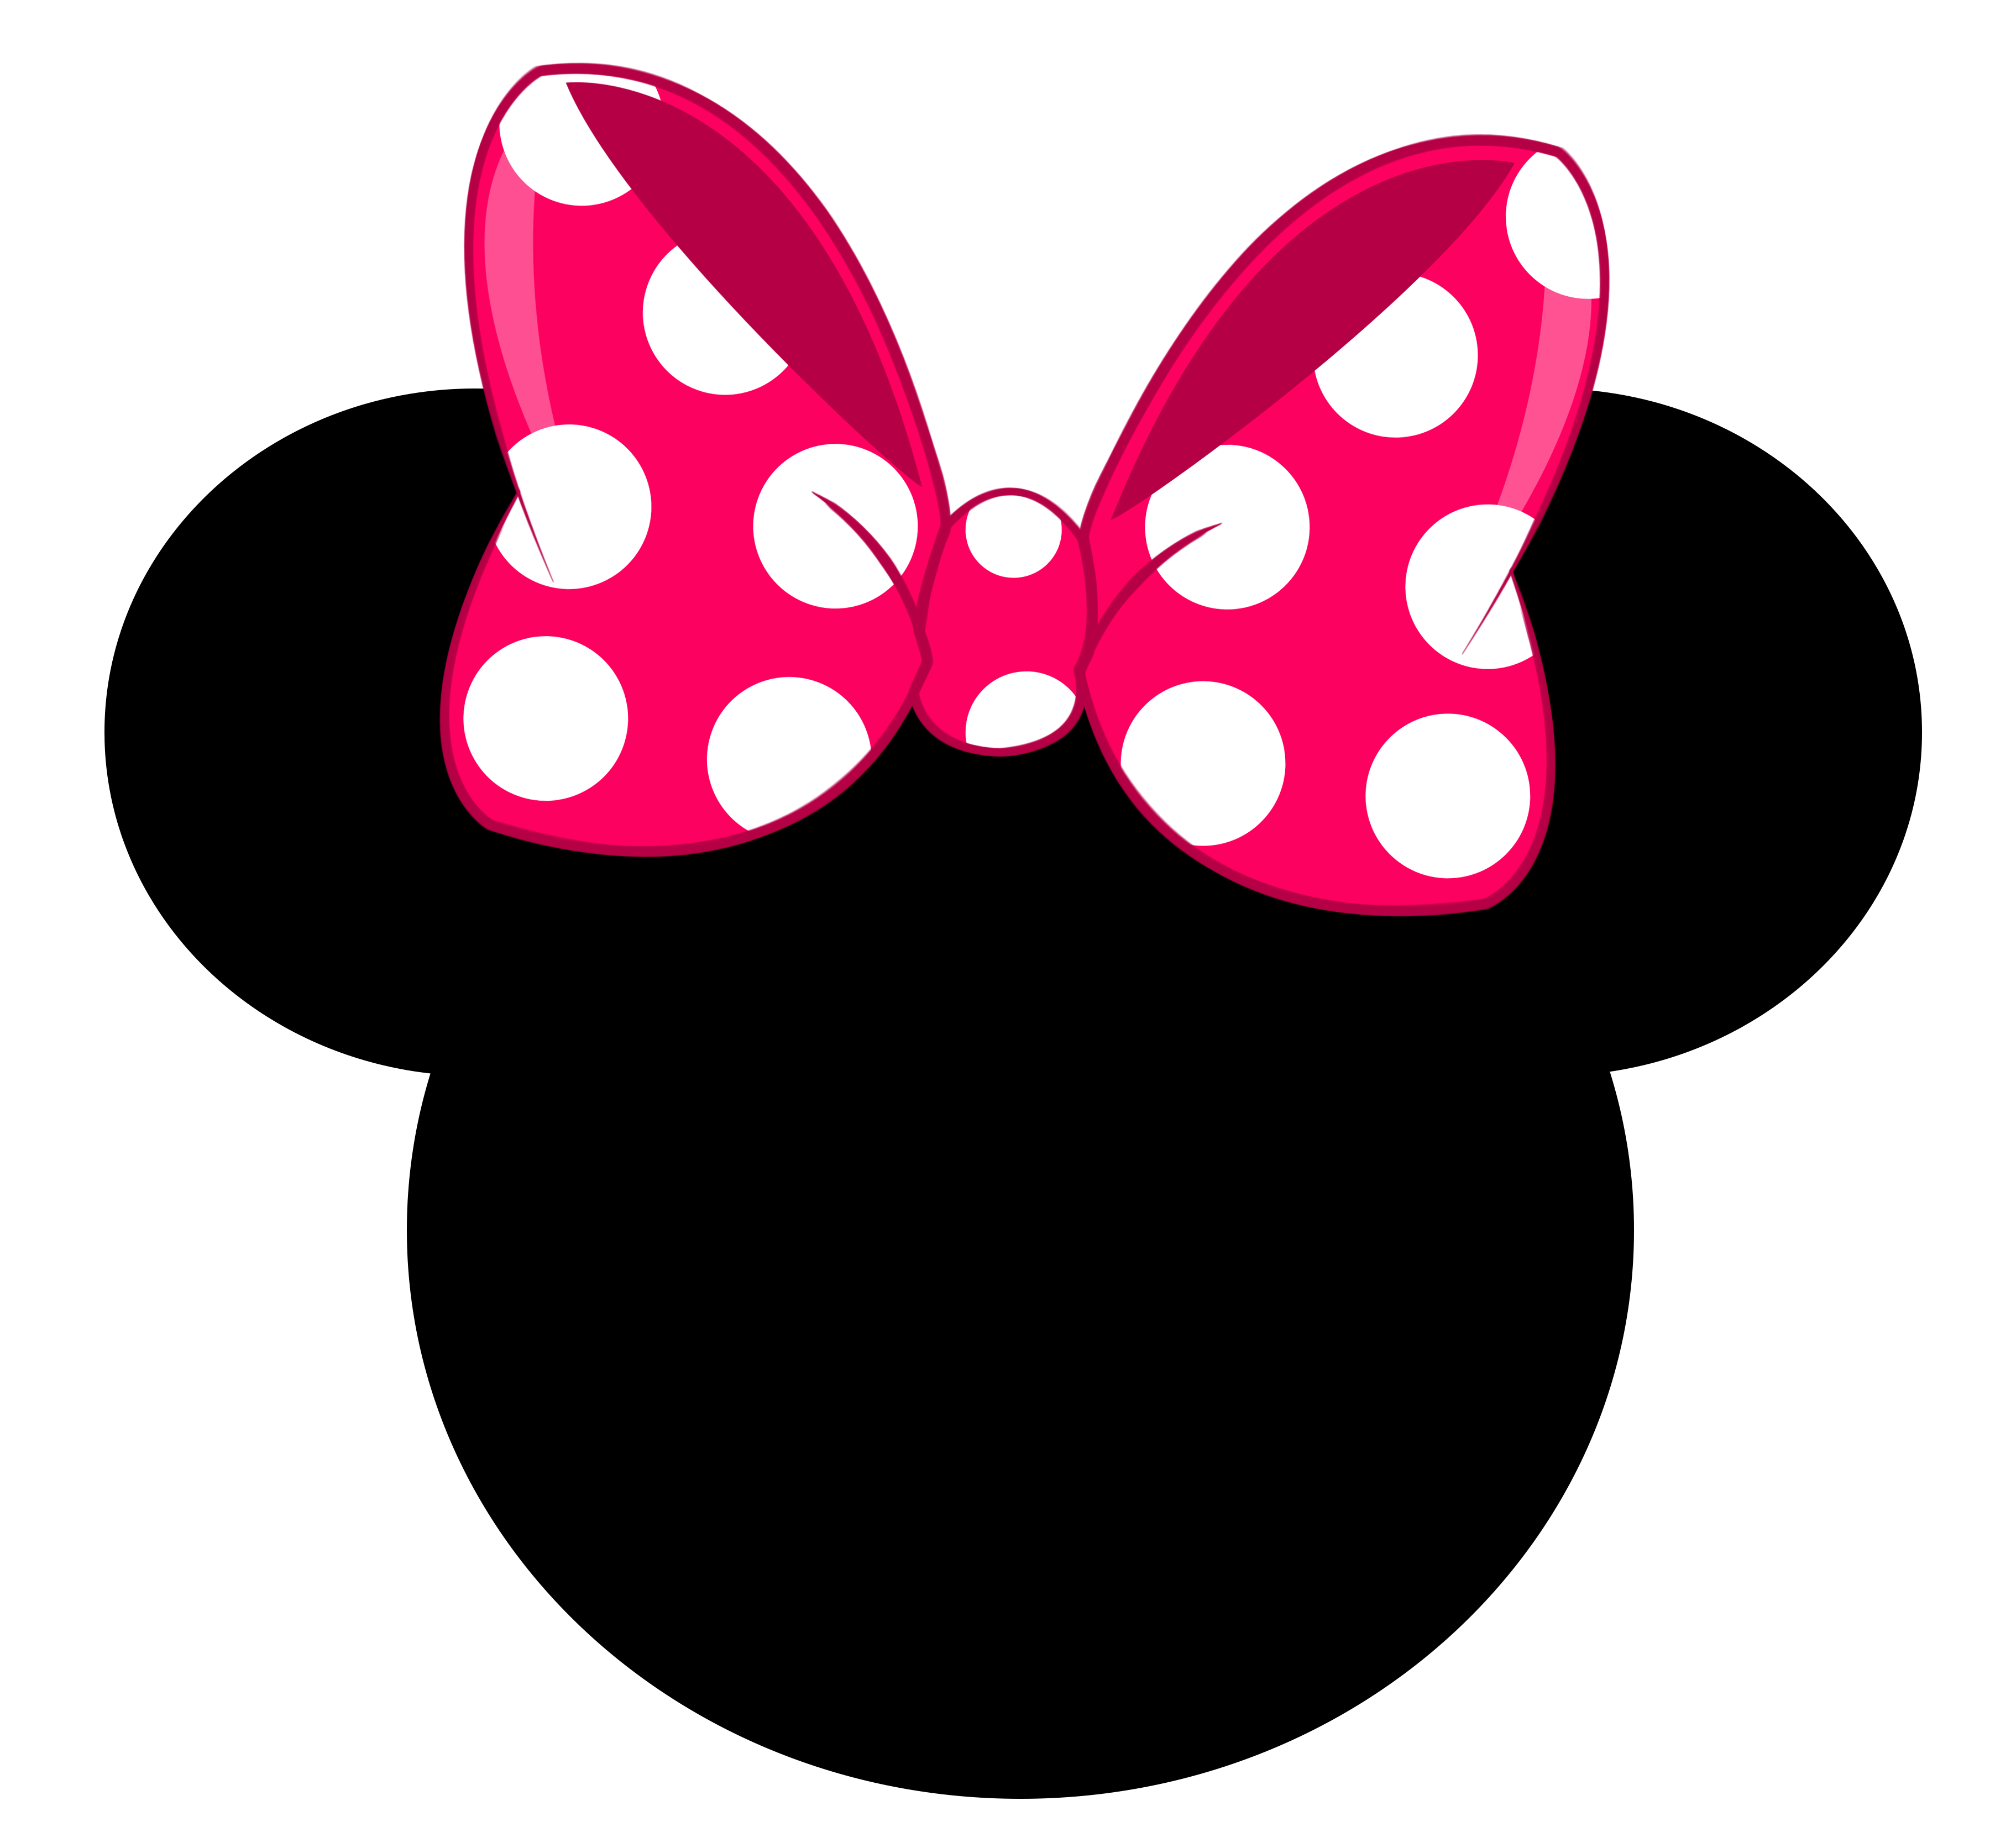 Minnie mouse ears images clipart images gallery for free.